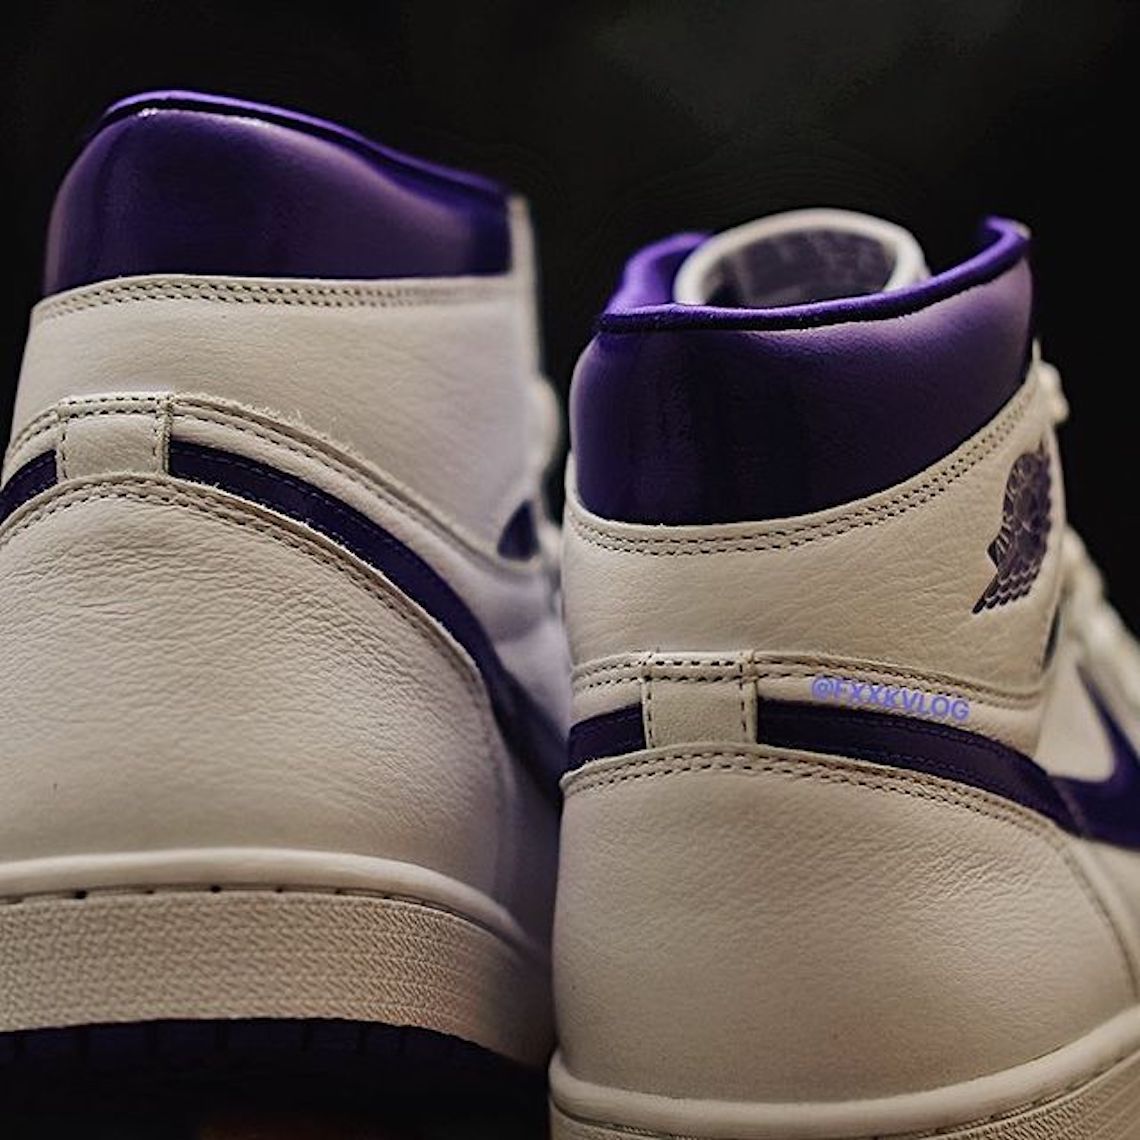 Synthetic leather strap with Jordan branding Retro High Og Wmns White Court Purple Cd0461 151 17